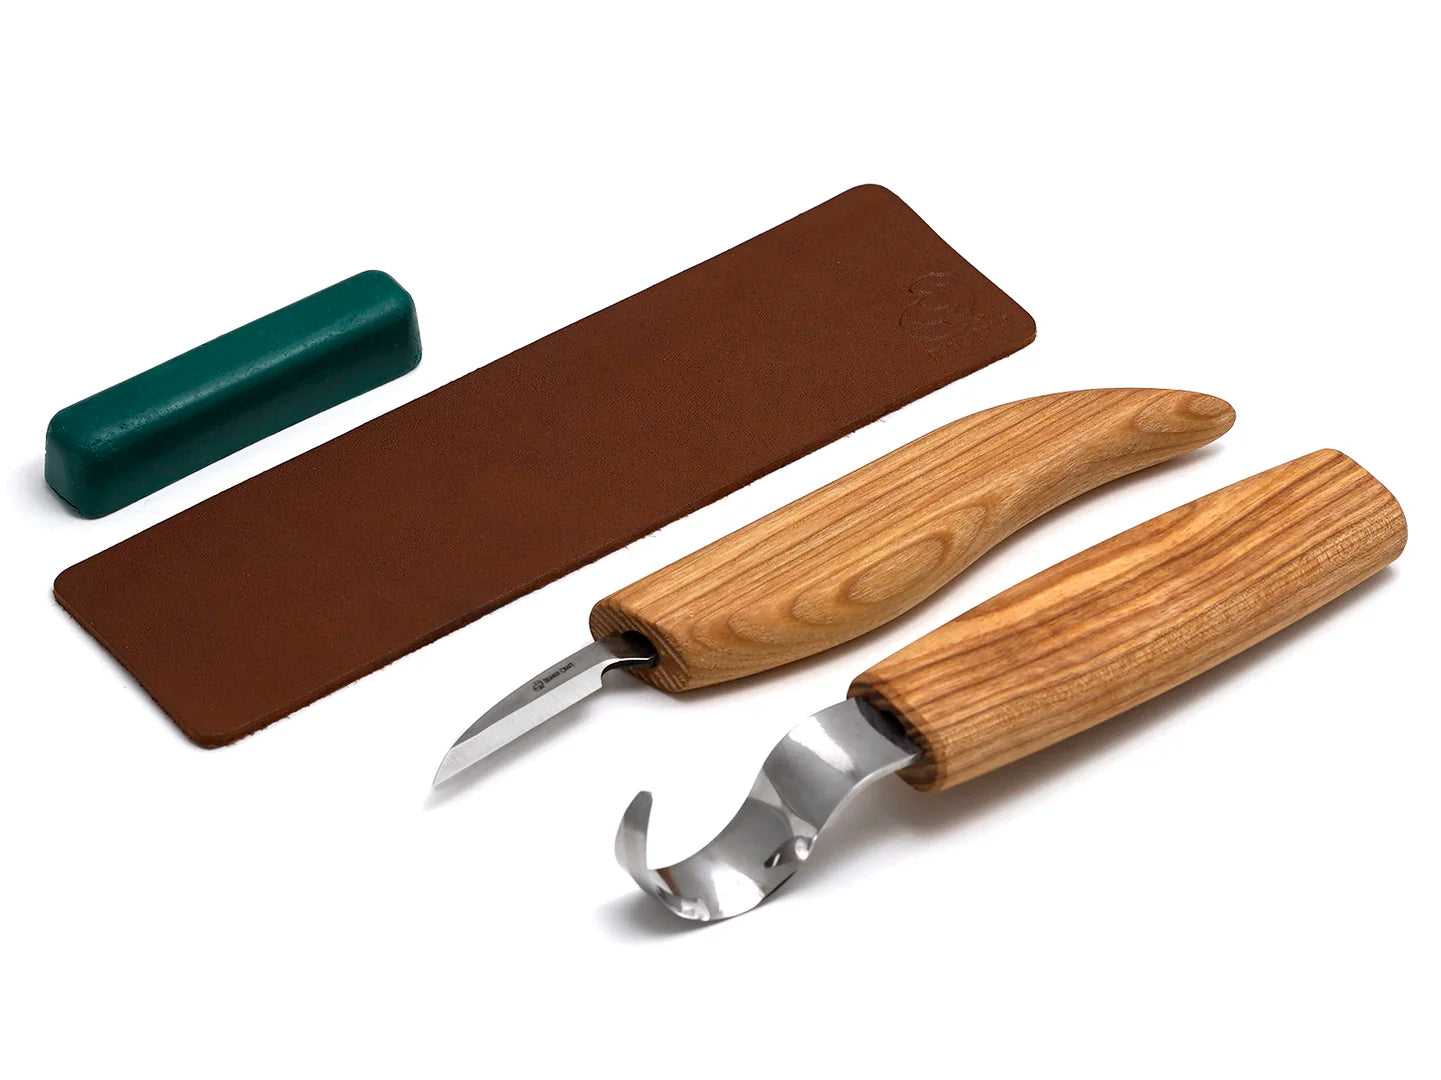 S02 - Spoon Carving Set with Small Knife